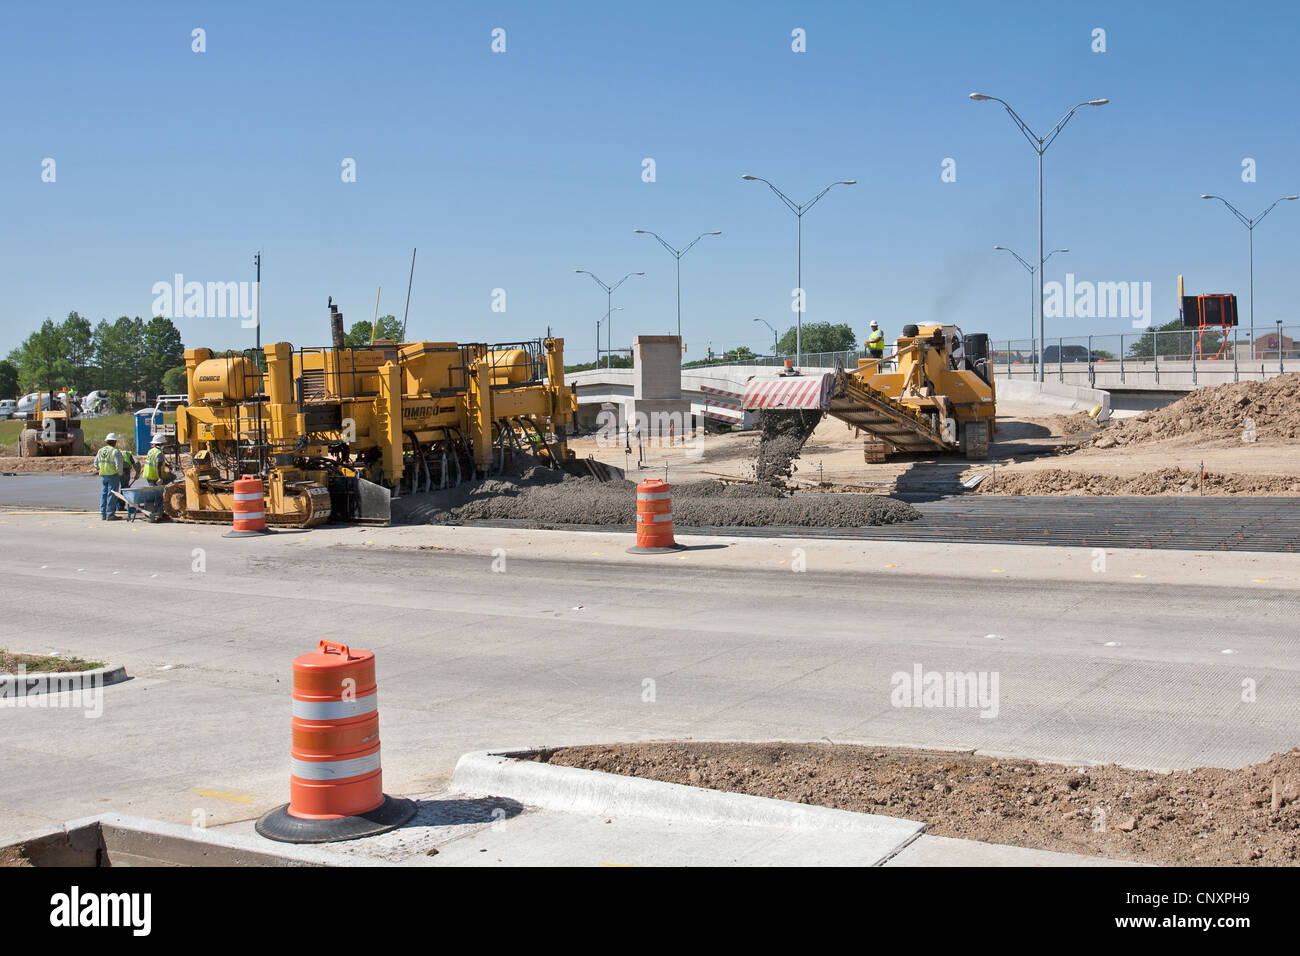 Streets are constructed by using a fluid concrete mix as workers hurry in making final touches before the concrete sets up. Stock Photo